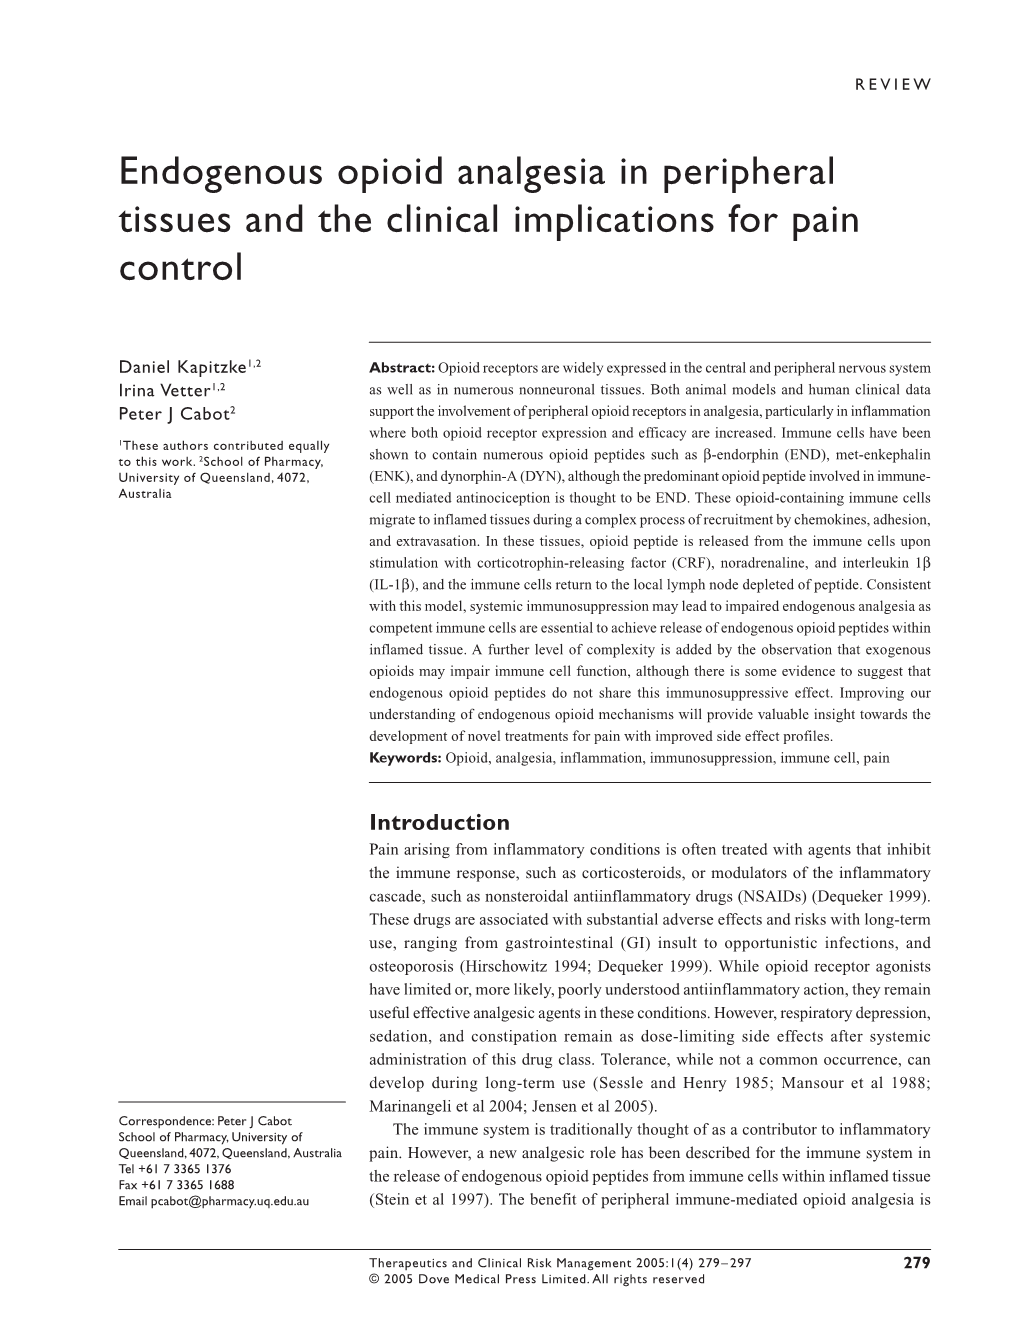 Endogenous Opioid Analgesia in Peripheral Tissues and the Clinical Implications for Pain Control